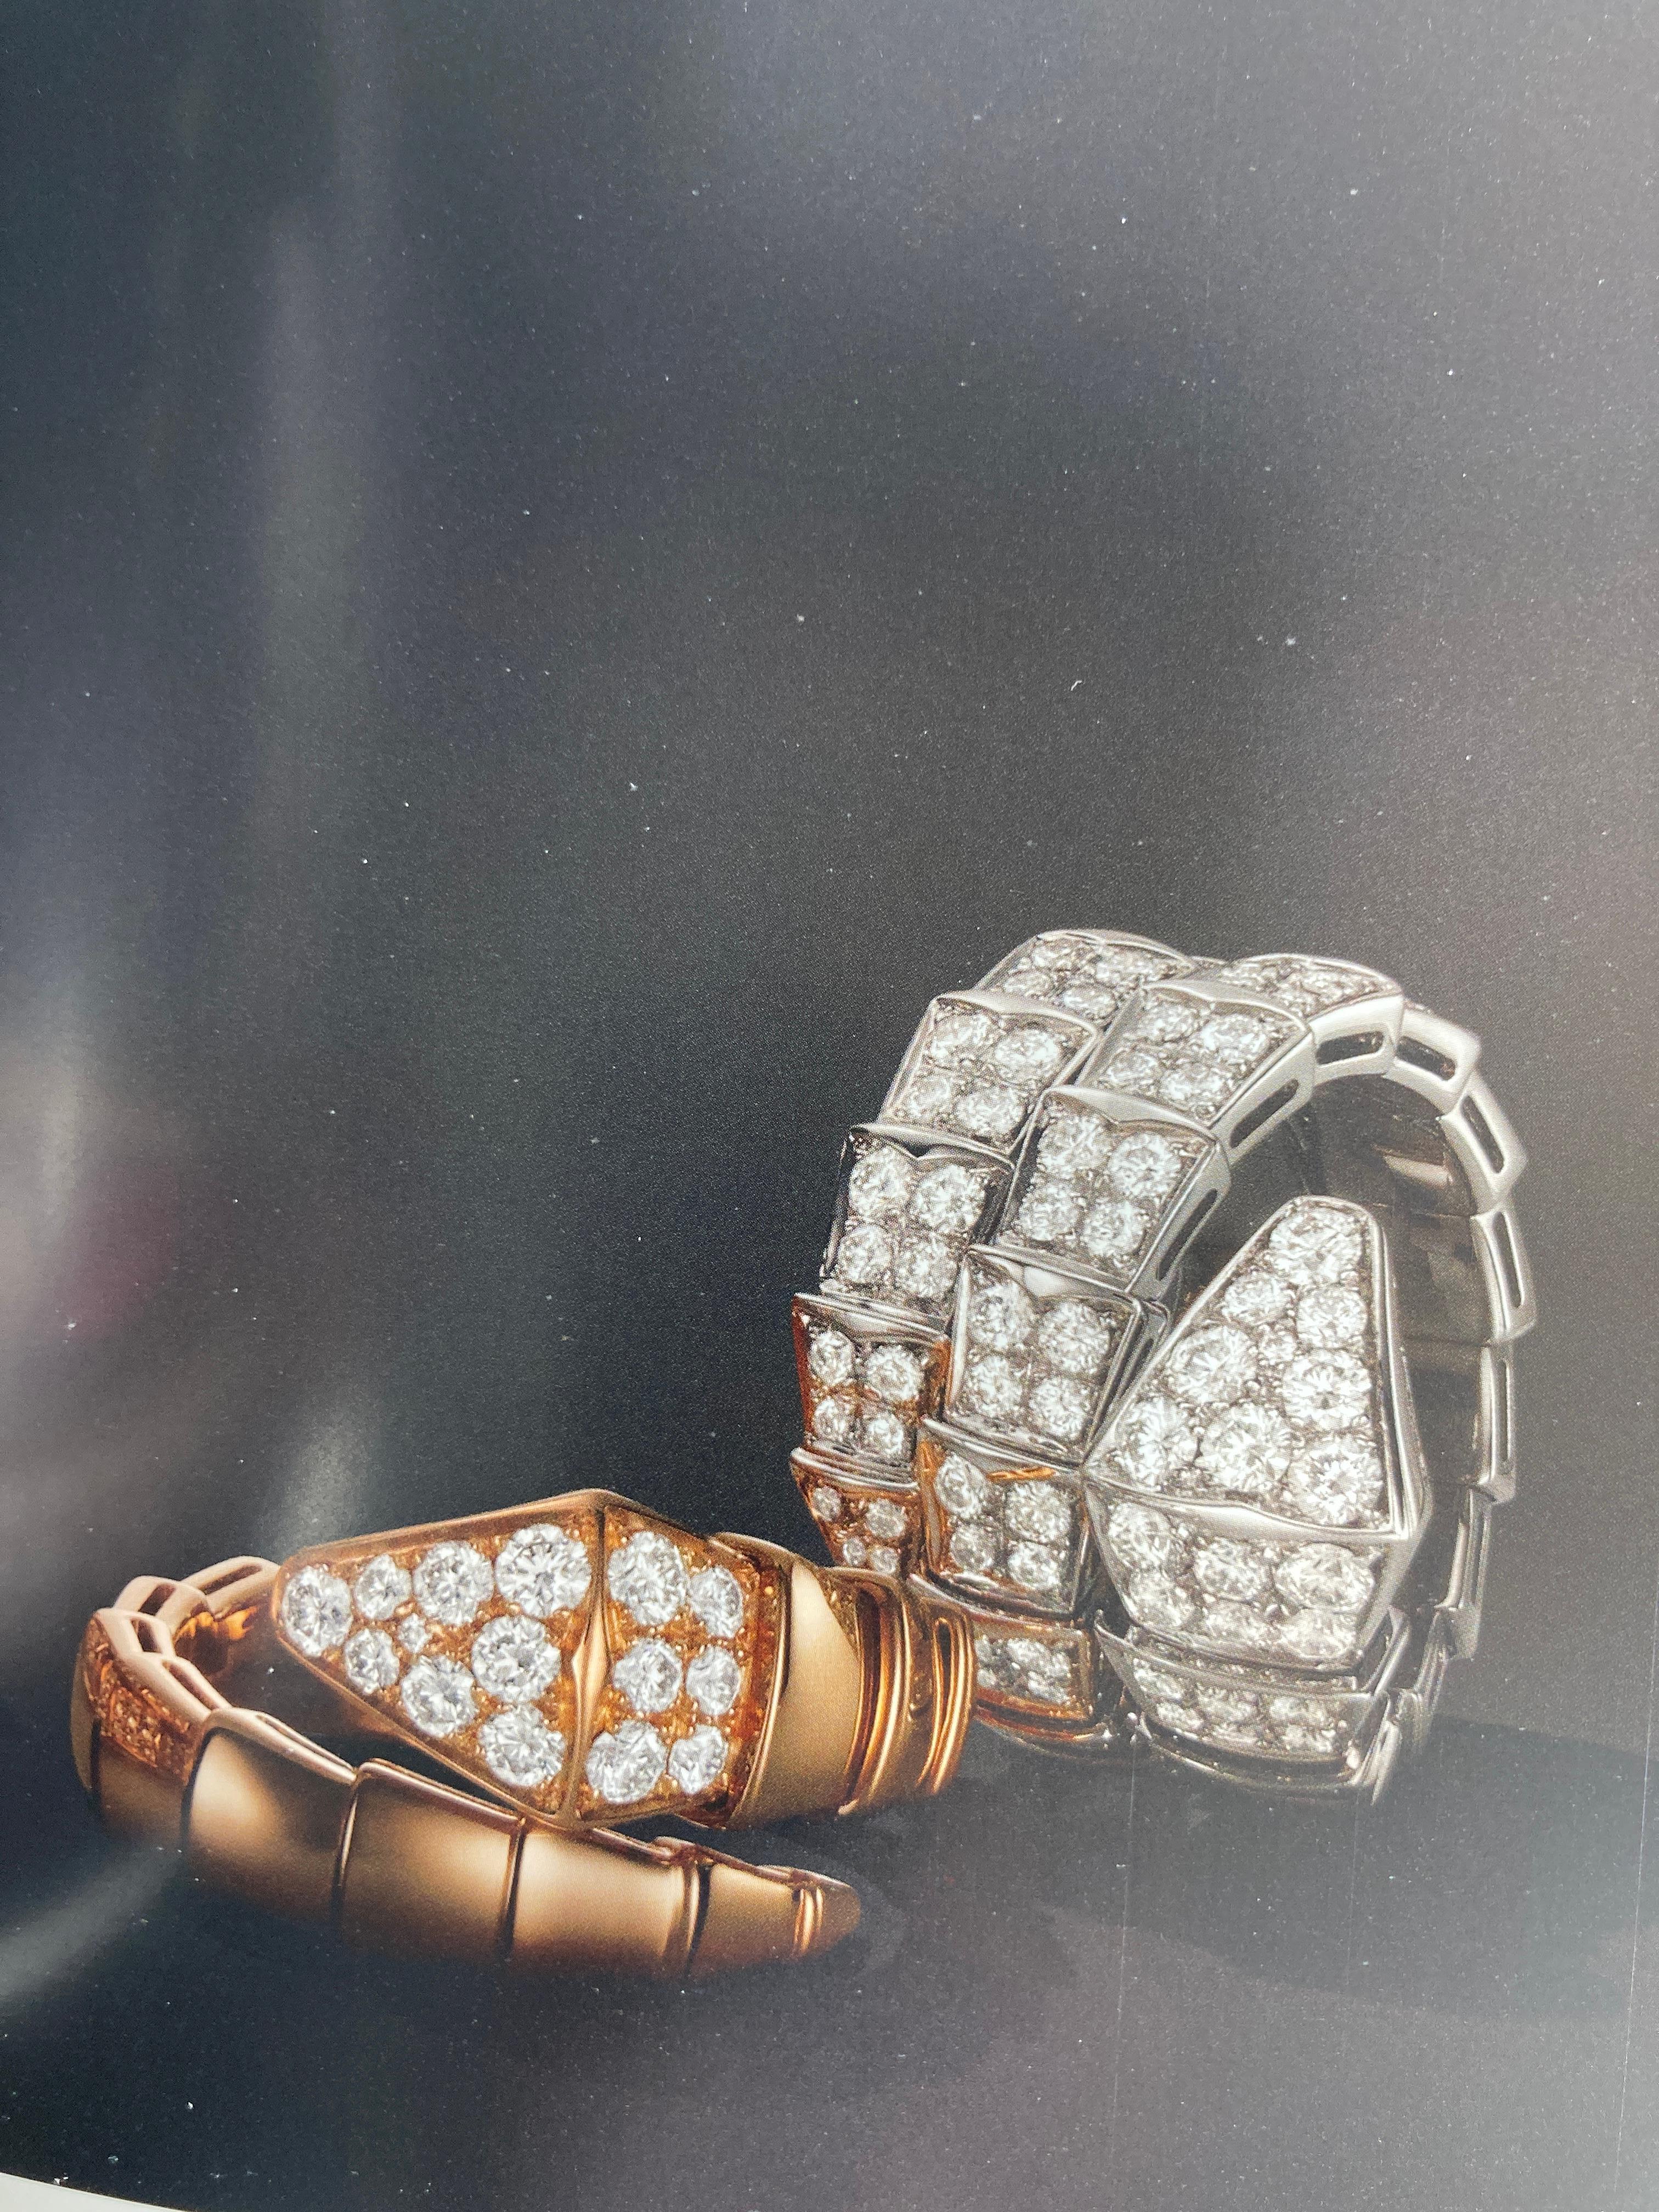 Set of Two Bulgari Brand Book Catalogue Jewelry and Watches 2013 In Good Condition For Sale In North Hollywood, CA